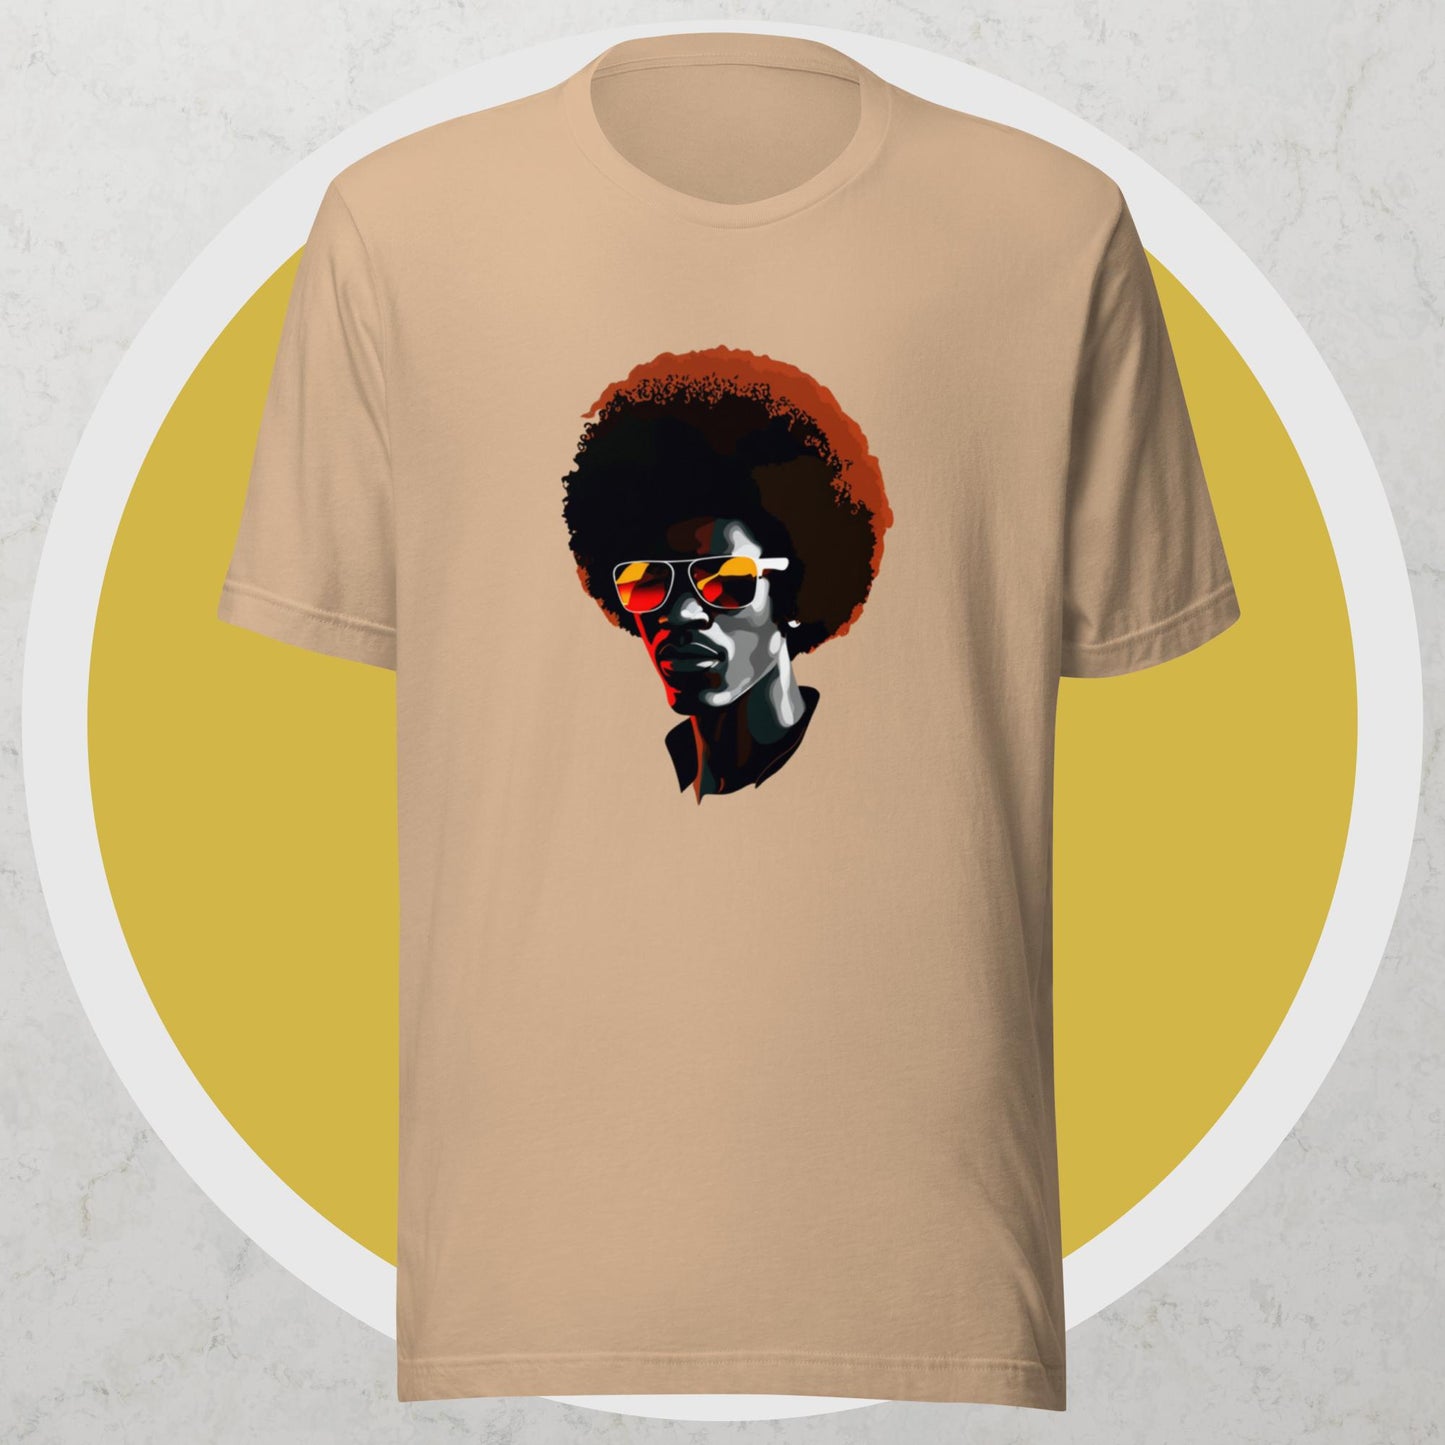 'THEE MANE EVENT': Unisex t-shirt